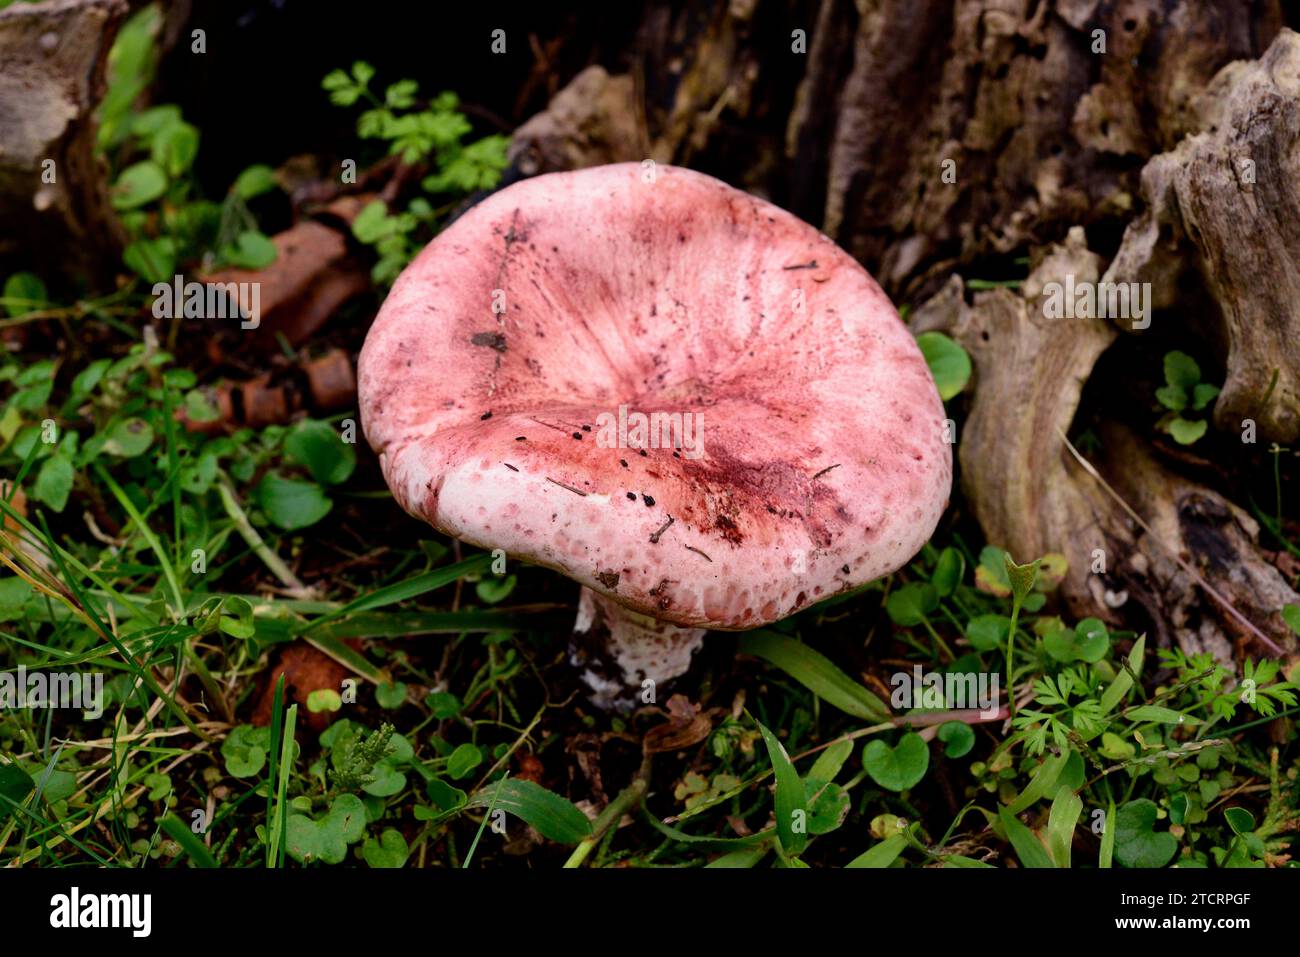 Pinkmottlet woodwash (Hygrophorus russula) is an edible mushroom. This copy comes from Montseny Biosphere Reserve, Barcelona province, Catalonia, Spai Stock Photo